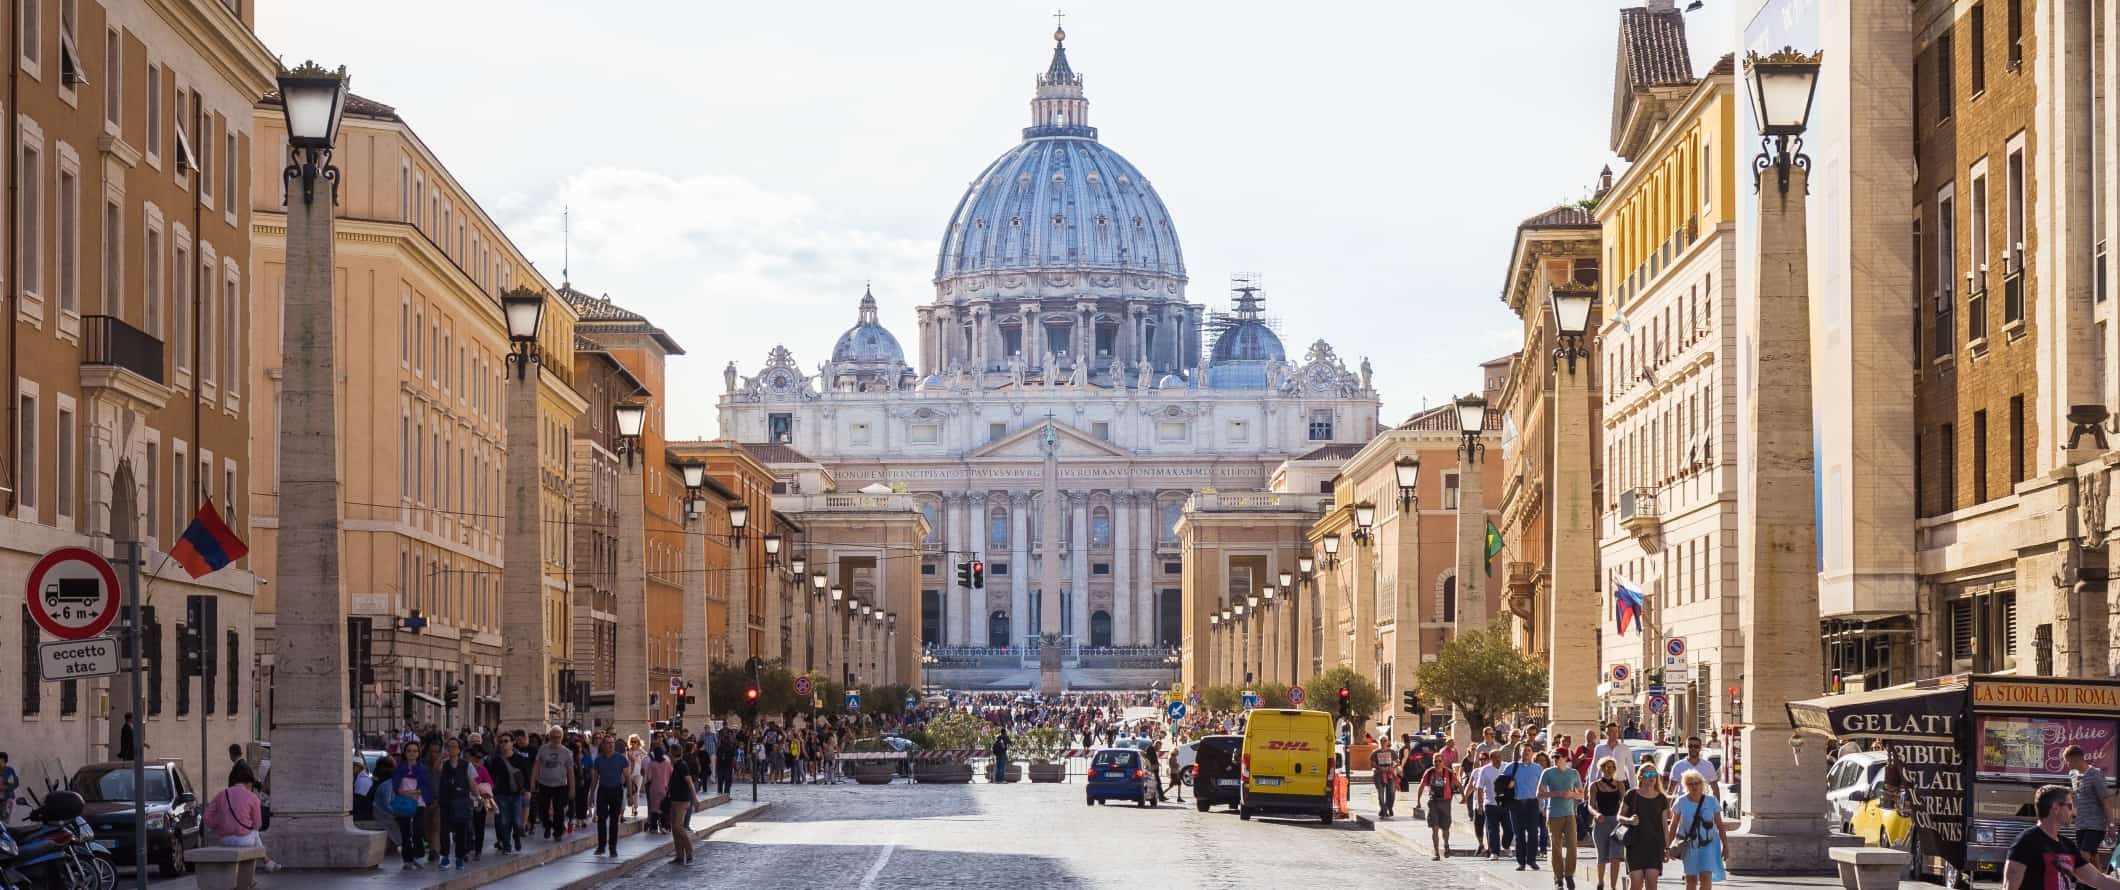 Wide street filled with people and basilica at the end in Rome, Italy